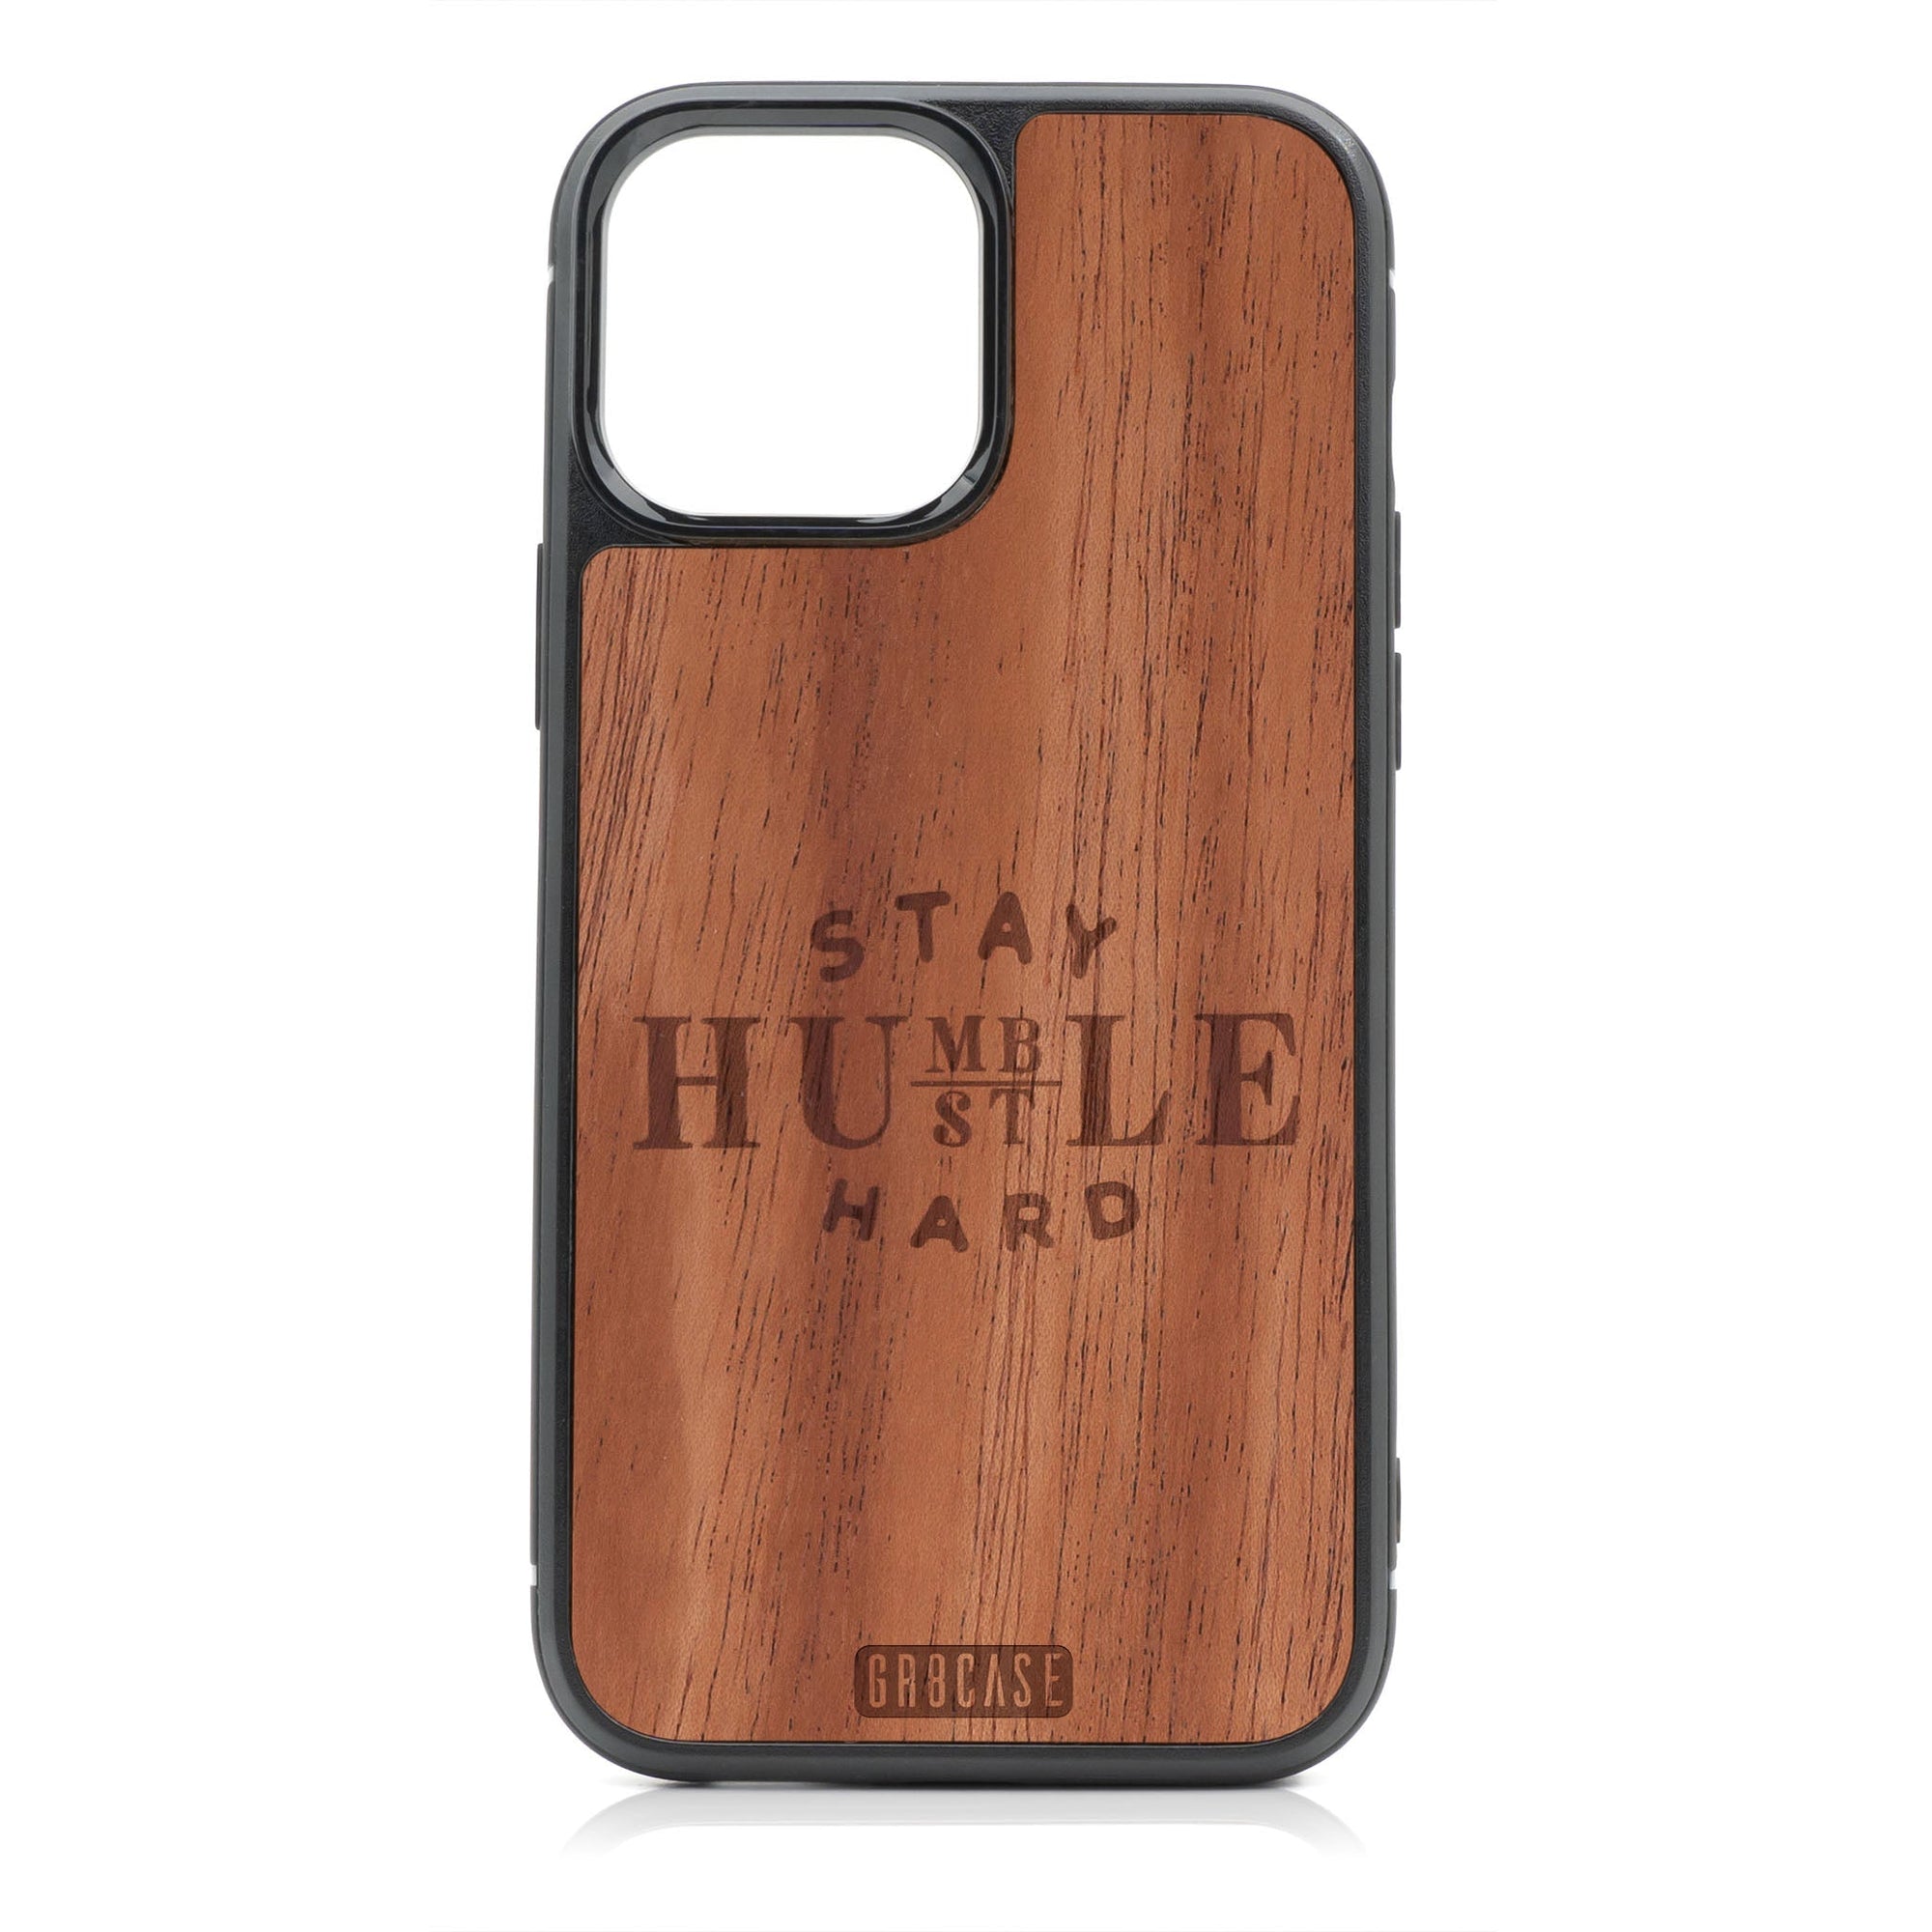 Stay Humble Hustle HardDesign Wood Case For iPhone 15 Pro Max